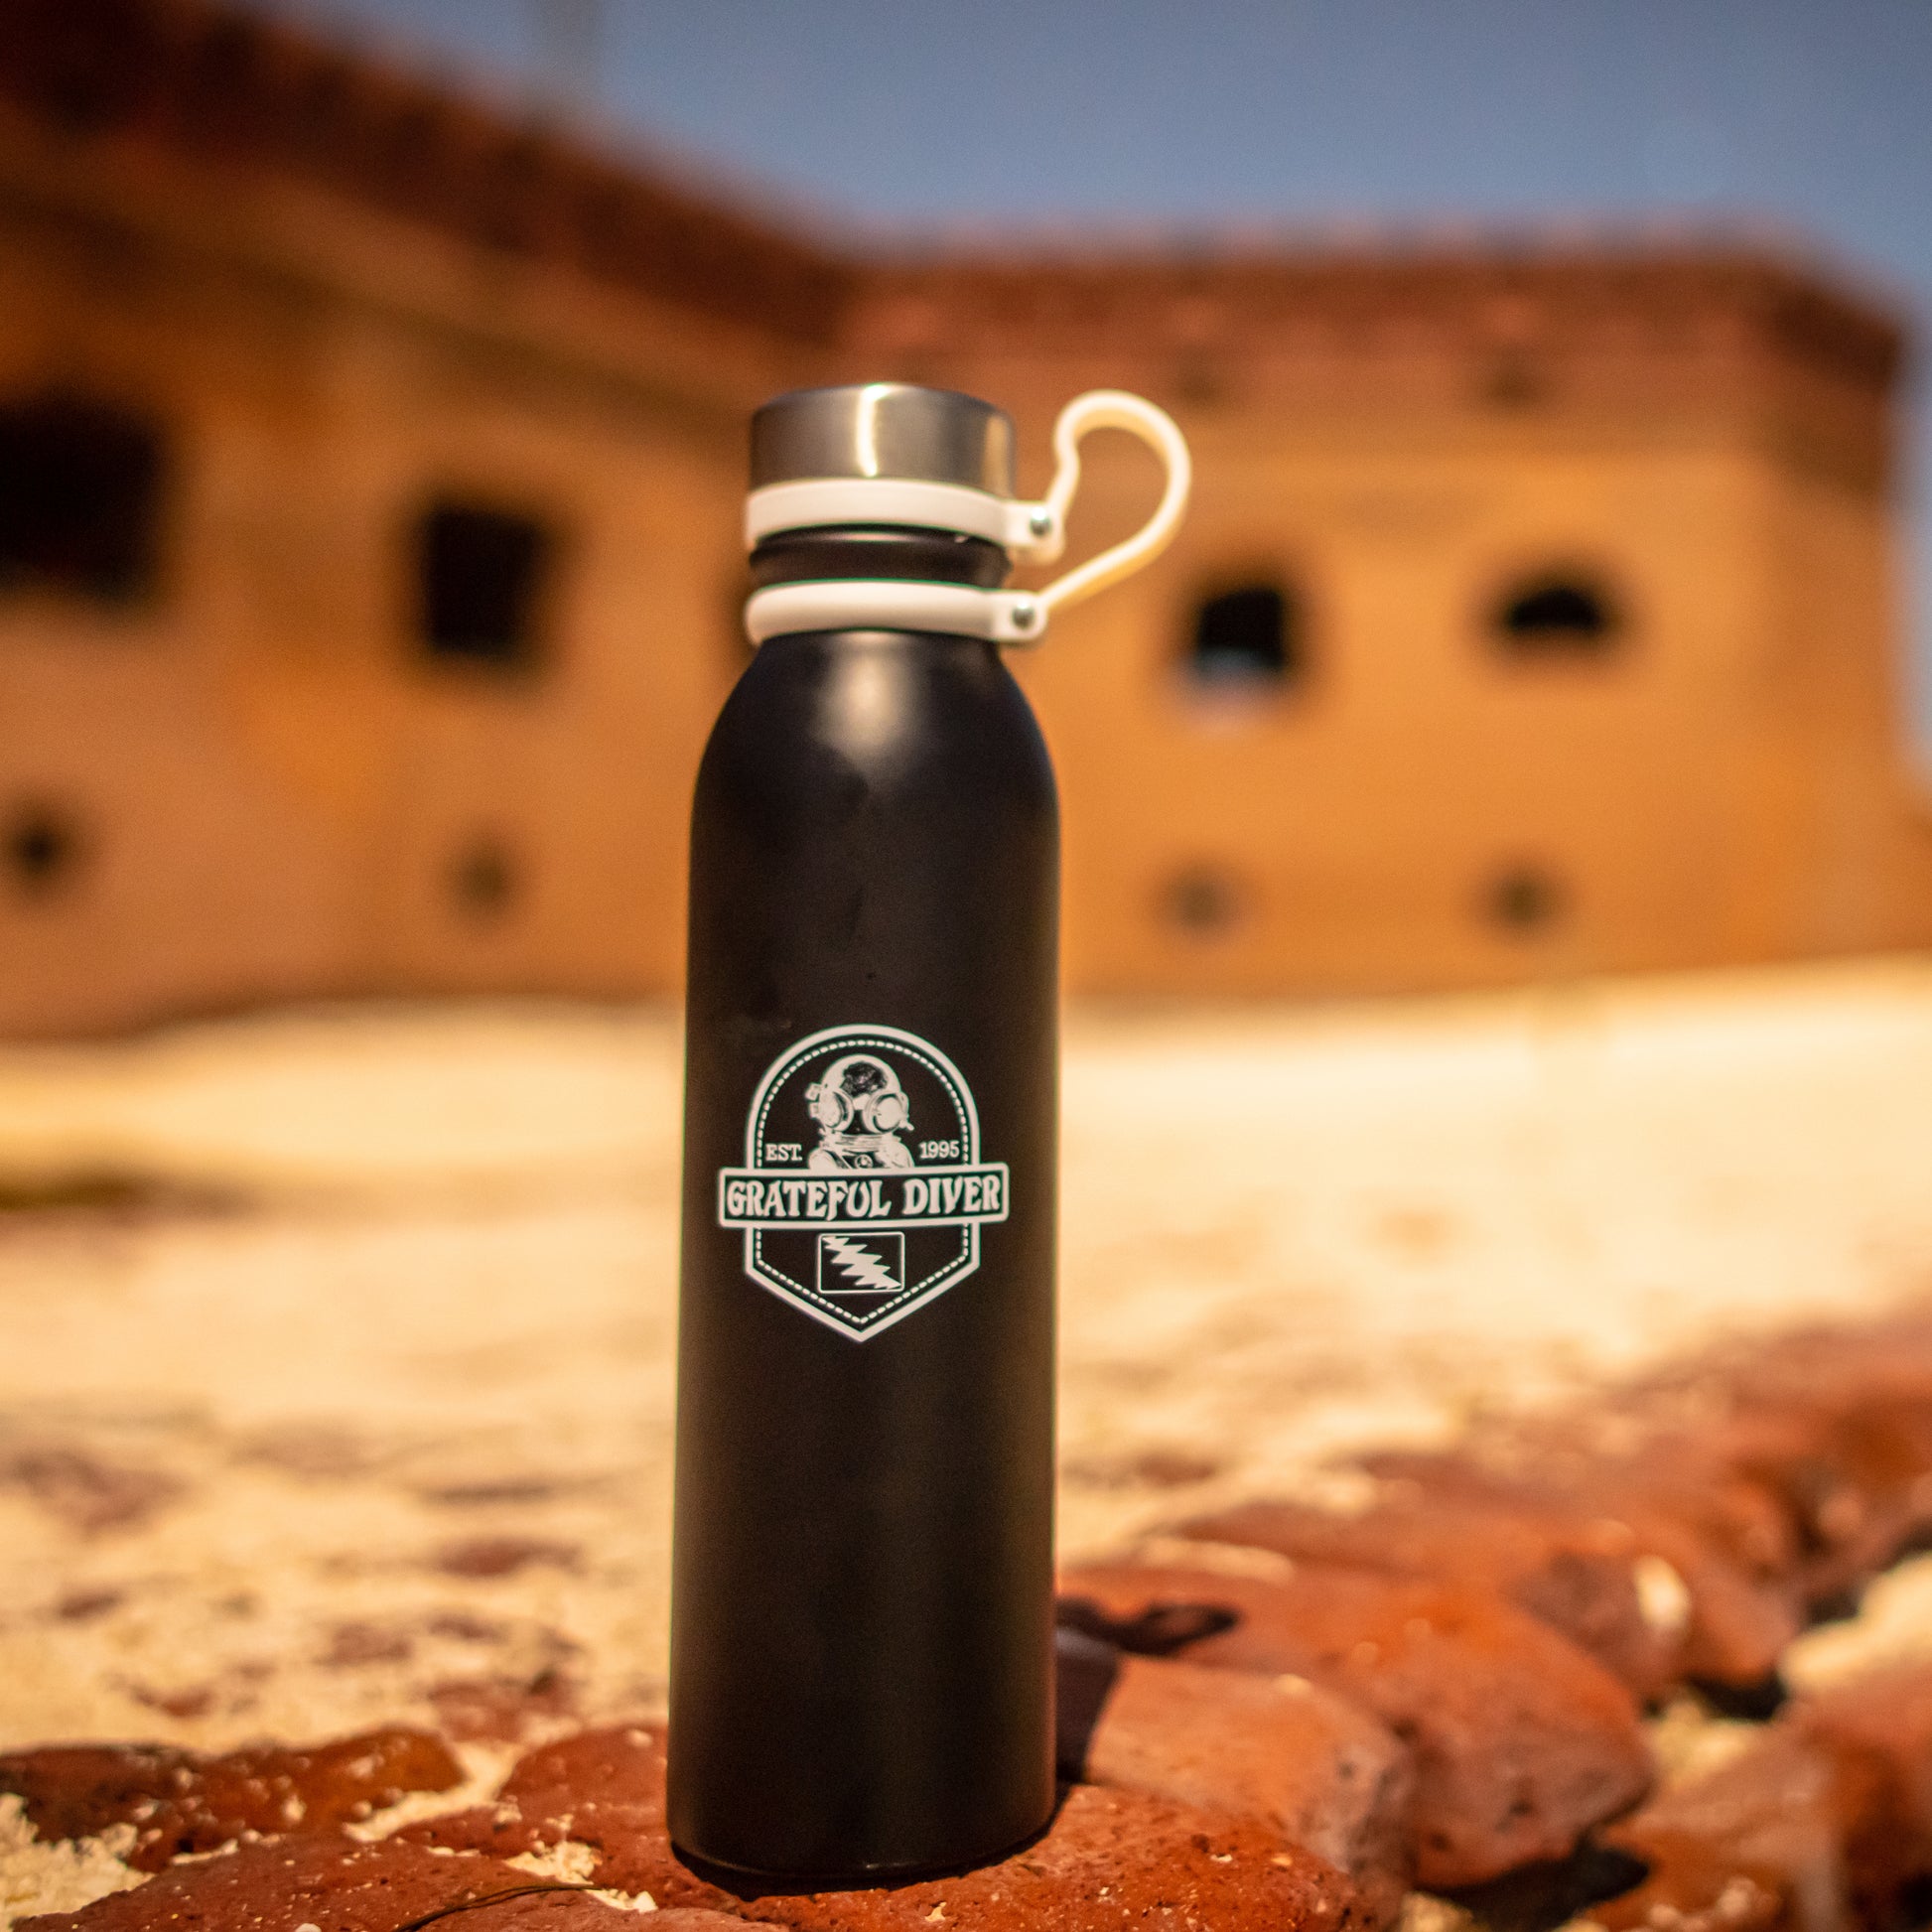 Grateful Diver Dive Helmet 25-oz. Stainless Steel Water Bottle on red clay rocks in front of adobe building